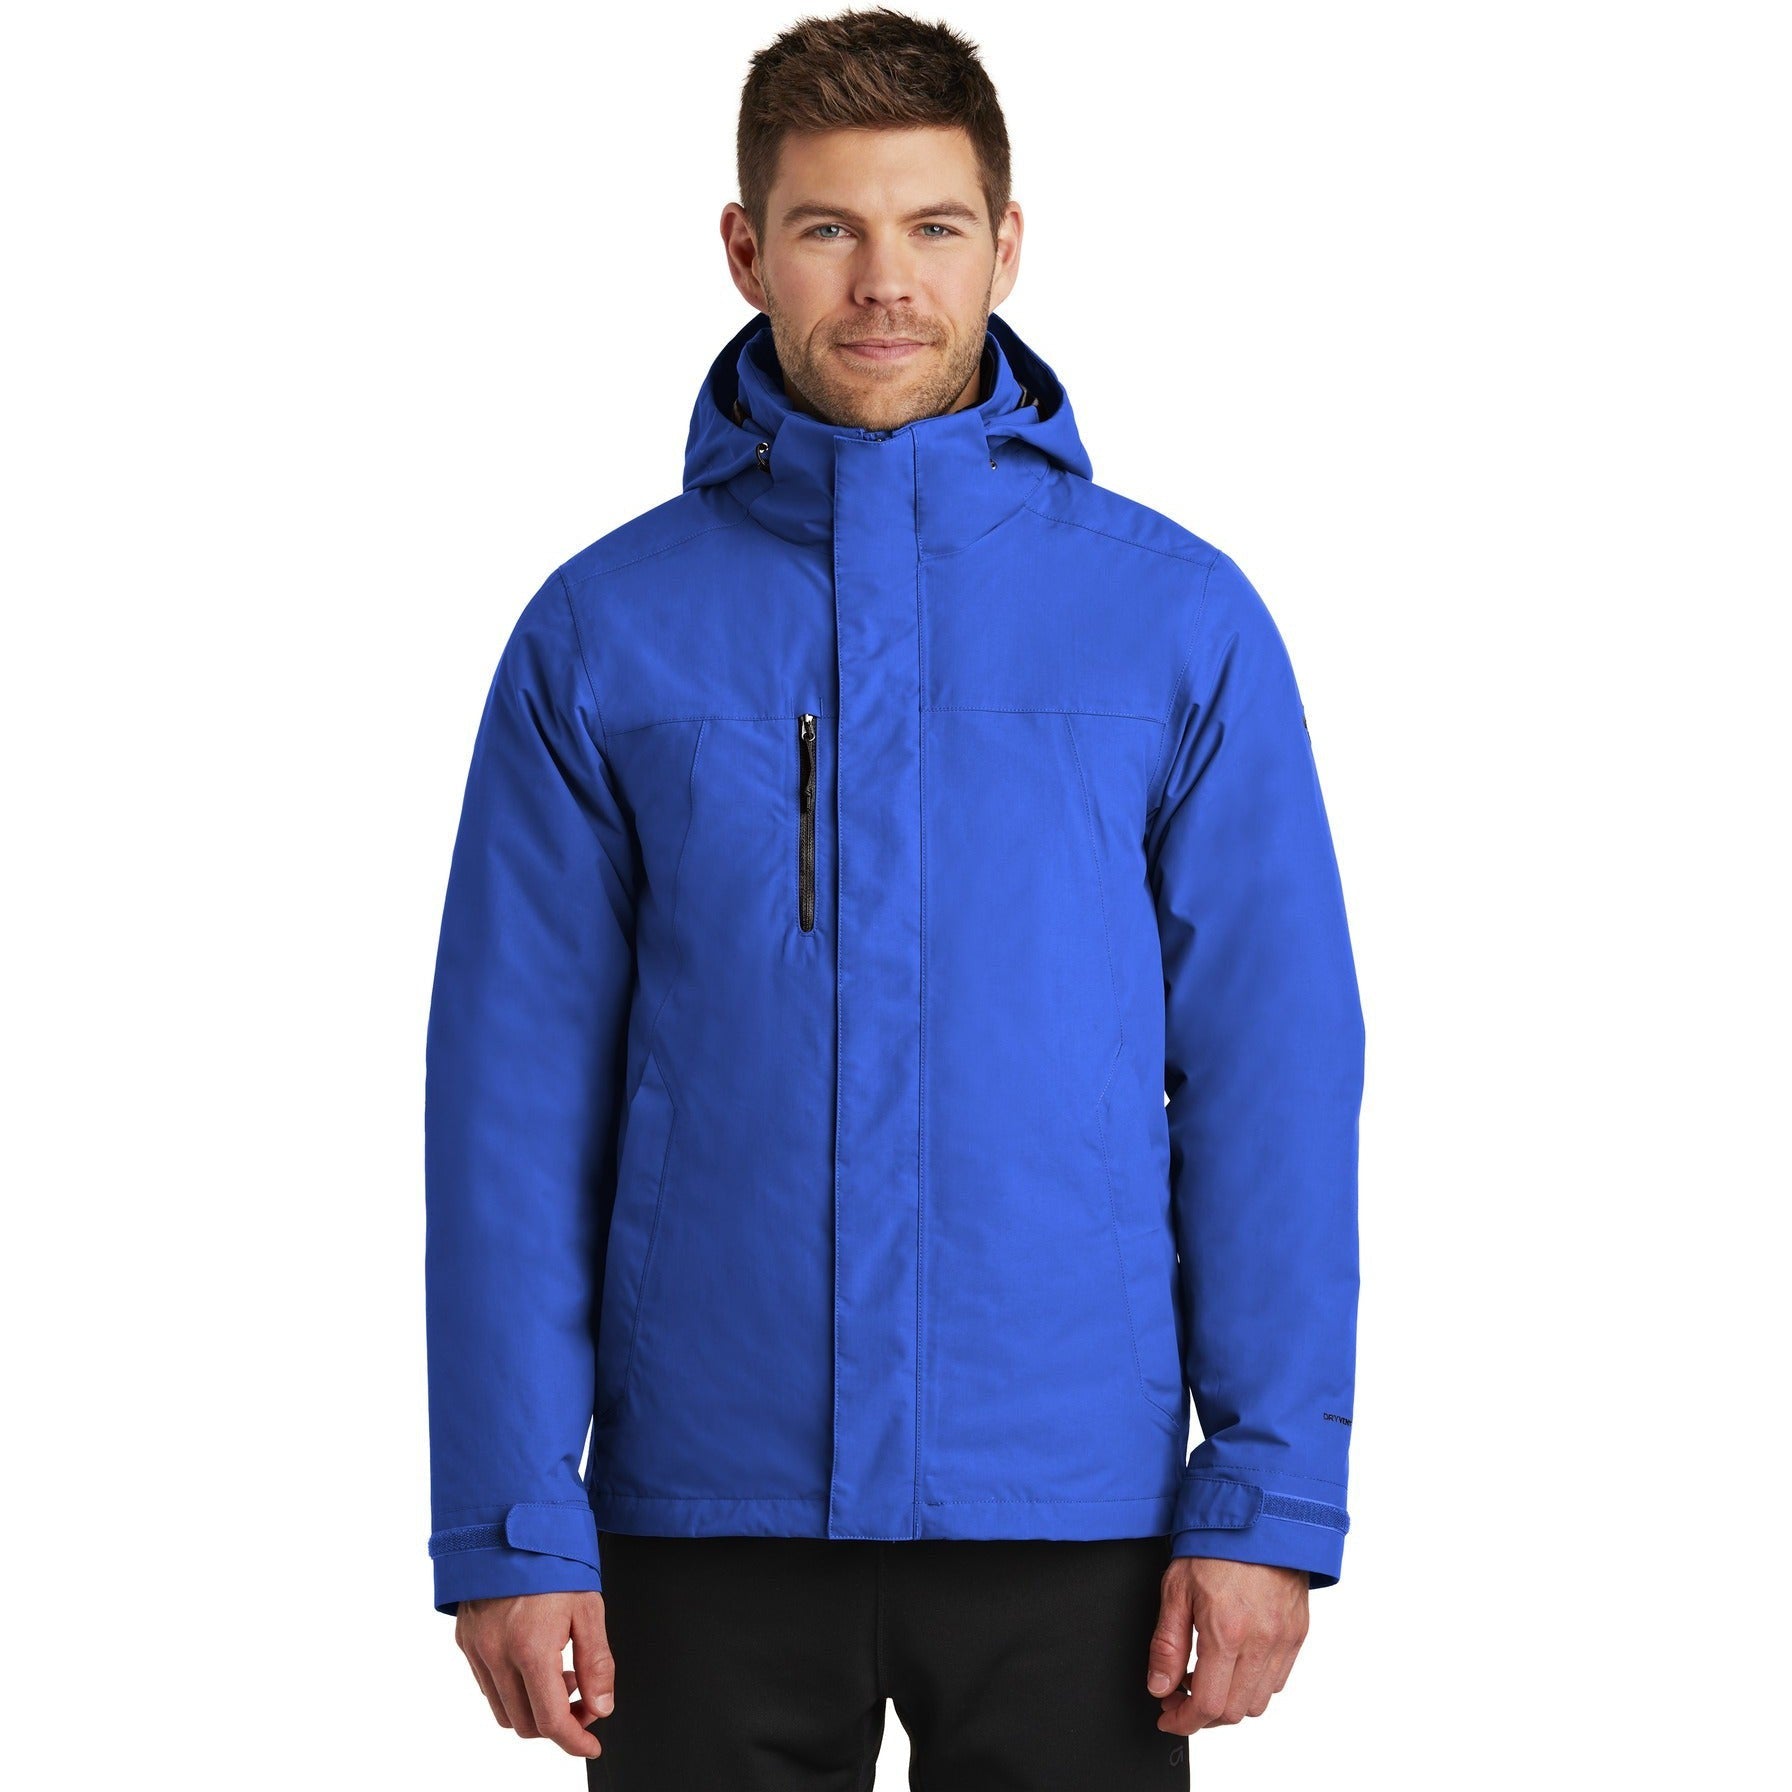 CLOSEOUT - The North Face Traverse Triclimate 3-in-1 Jacket